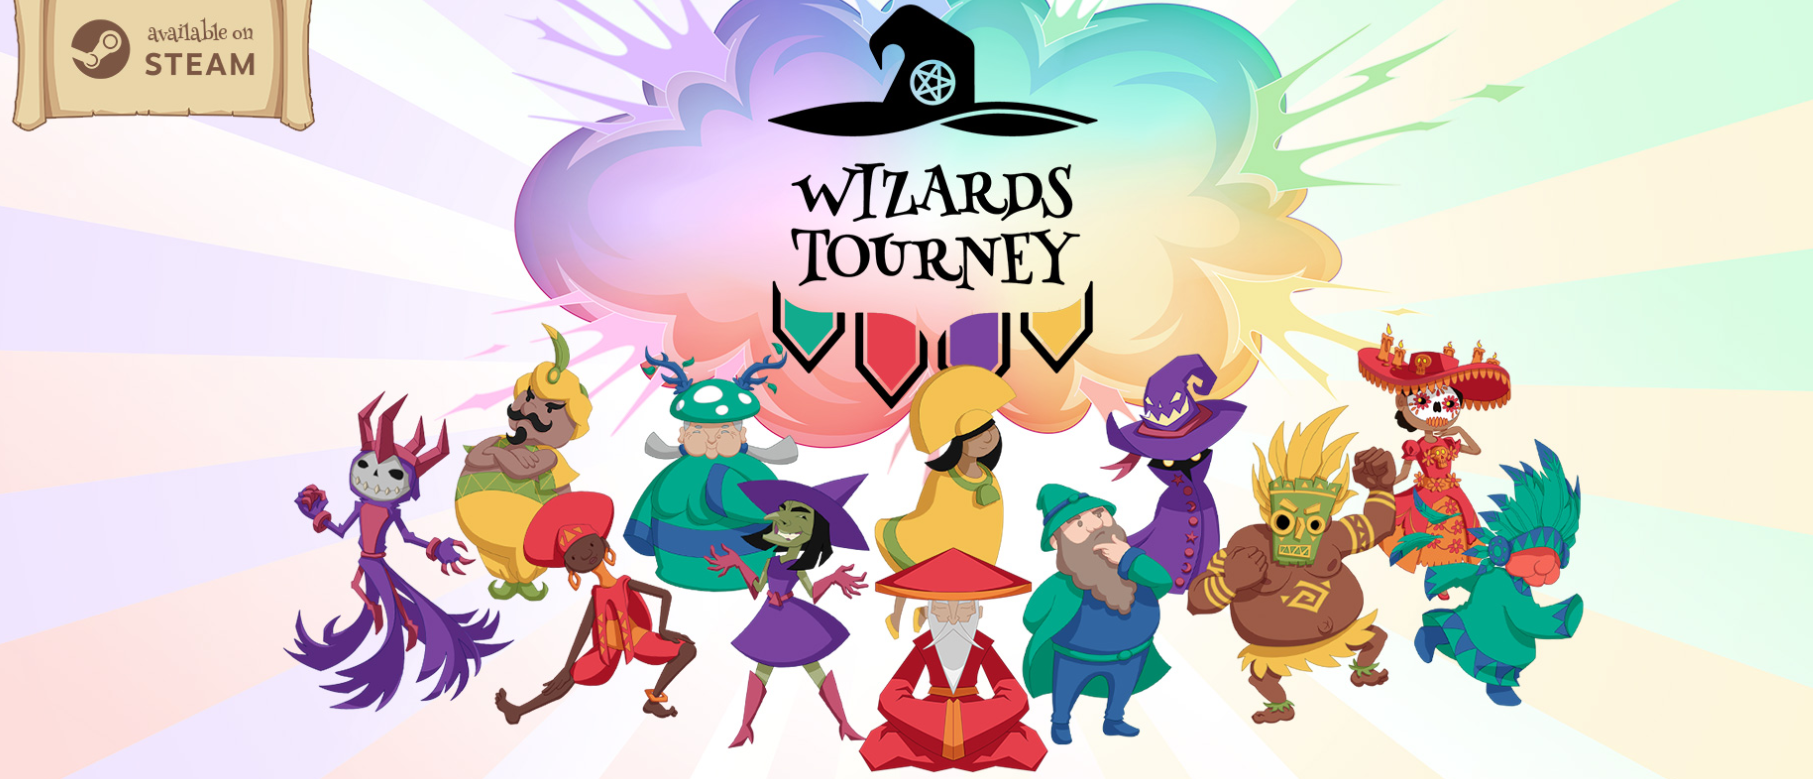 Wizards Tourney Steam Game Release PS4